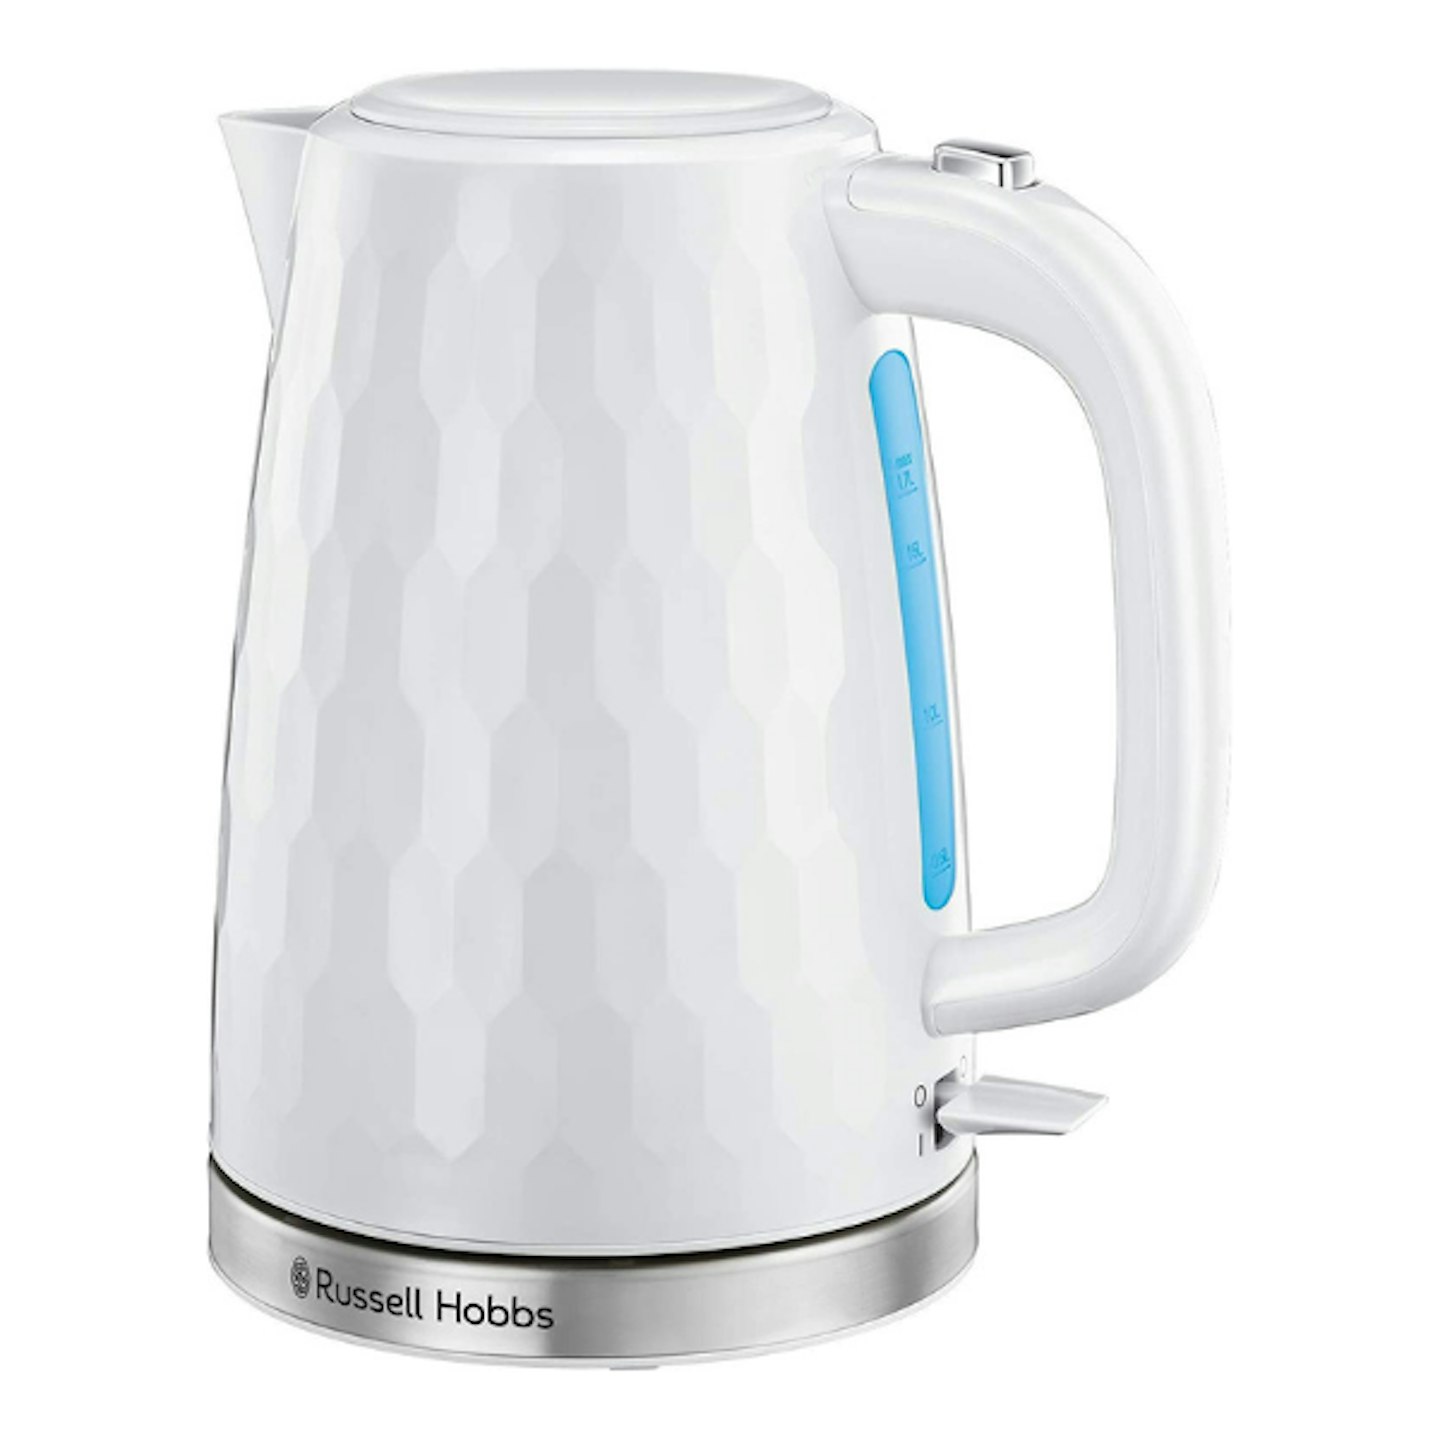 Russell Hobbs 26050 Cordless Electric Kettle